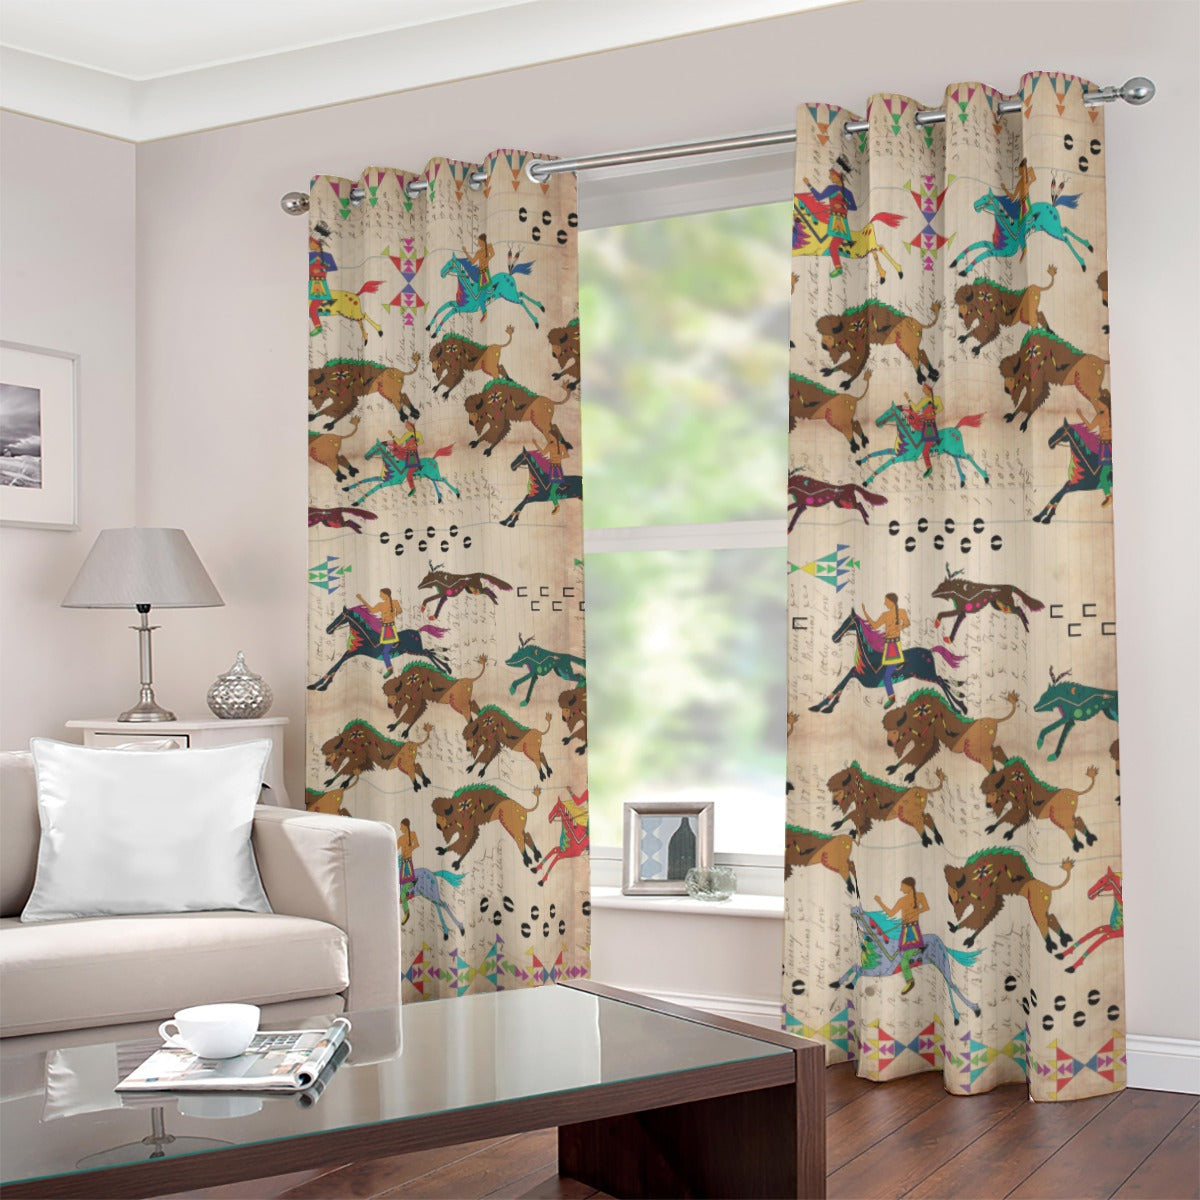 The Hunt Window Blackout Curtain  (42 inch x 45 inch)